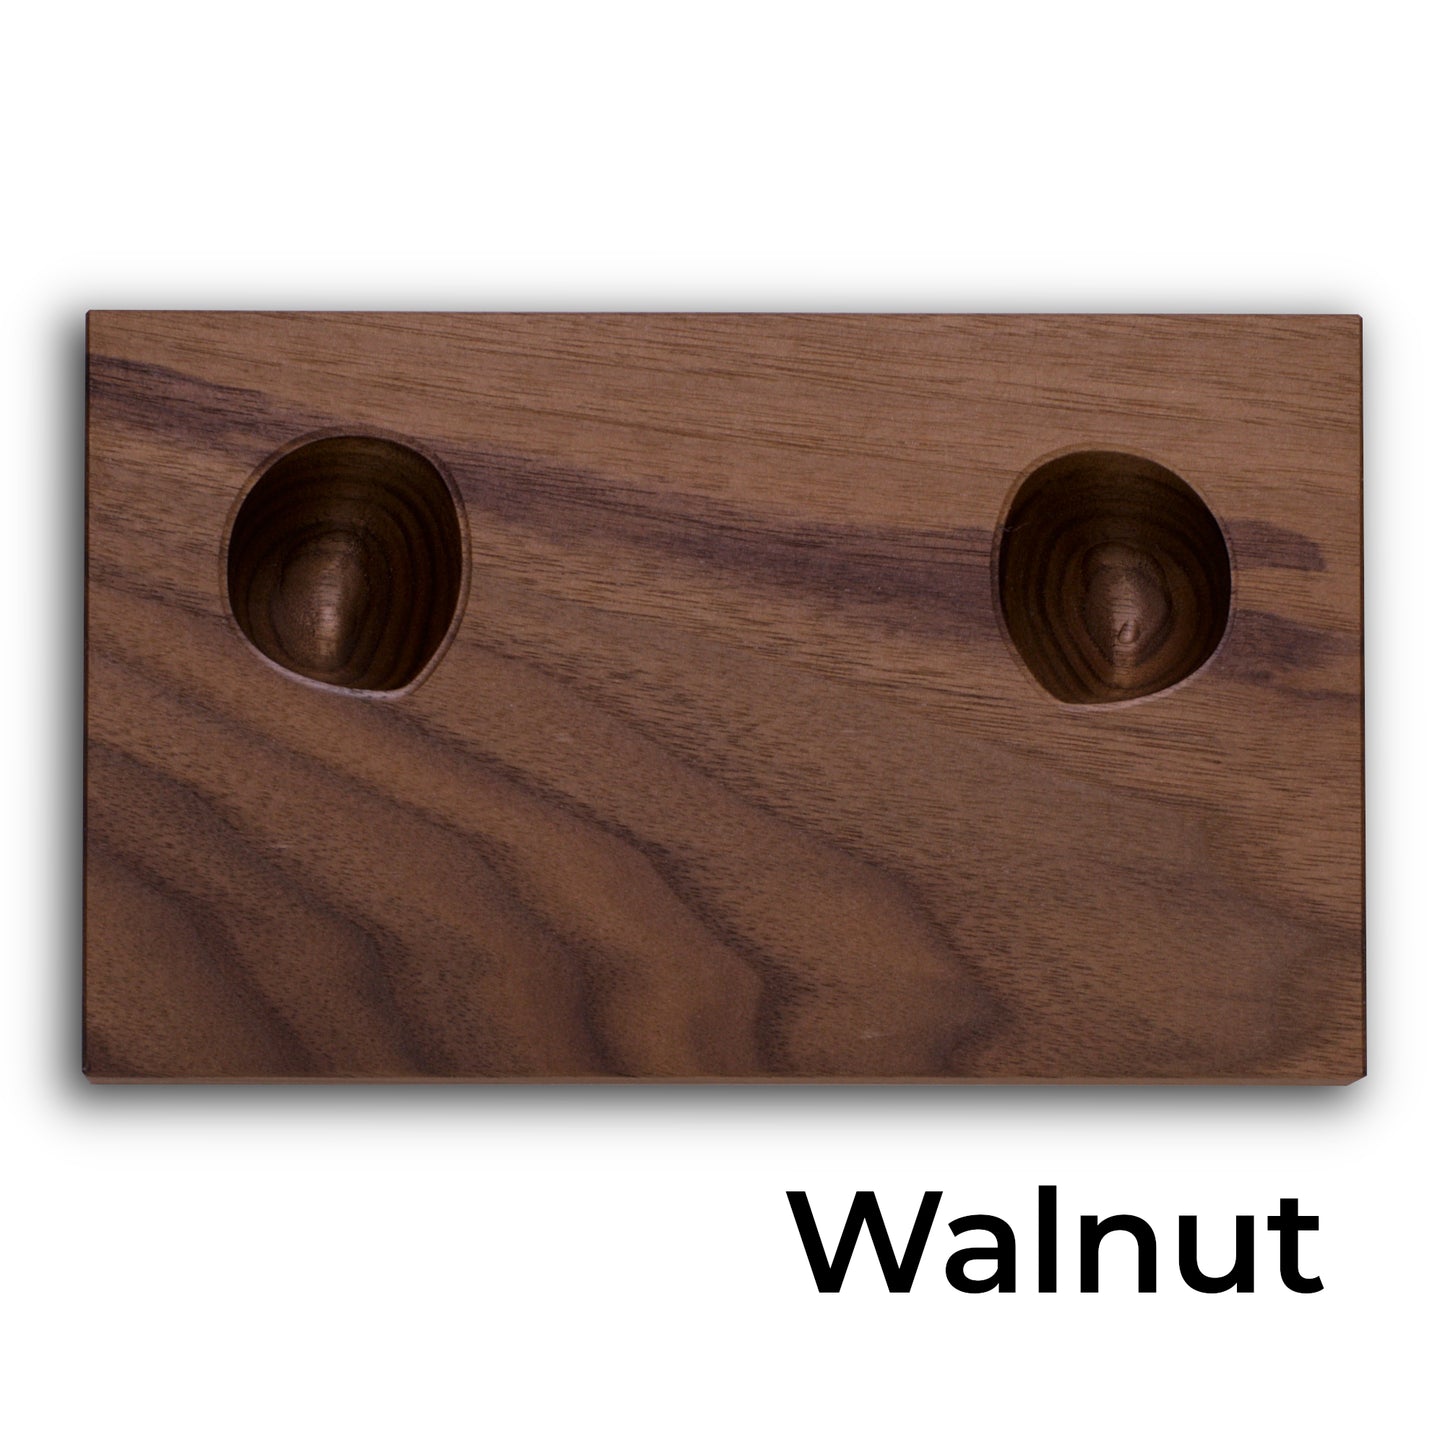 Wooden stand in Walnut for Playstation 4 dualshock controller